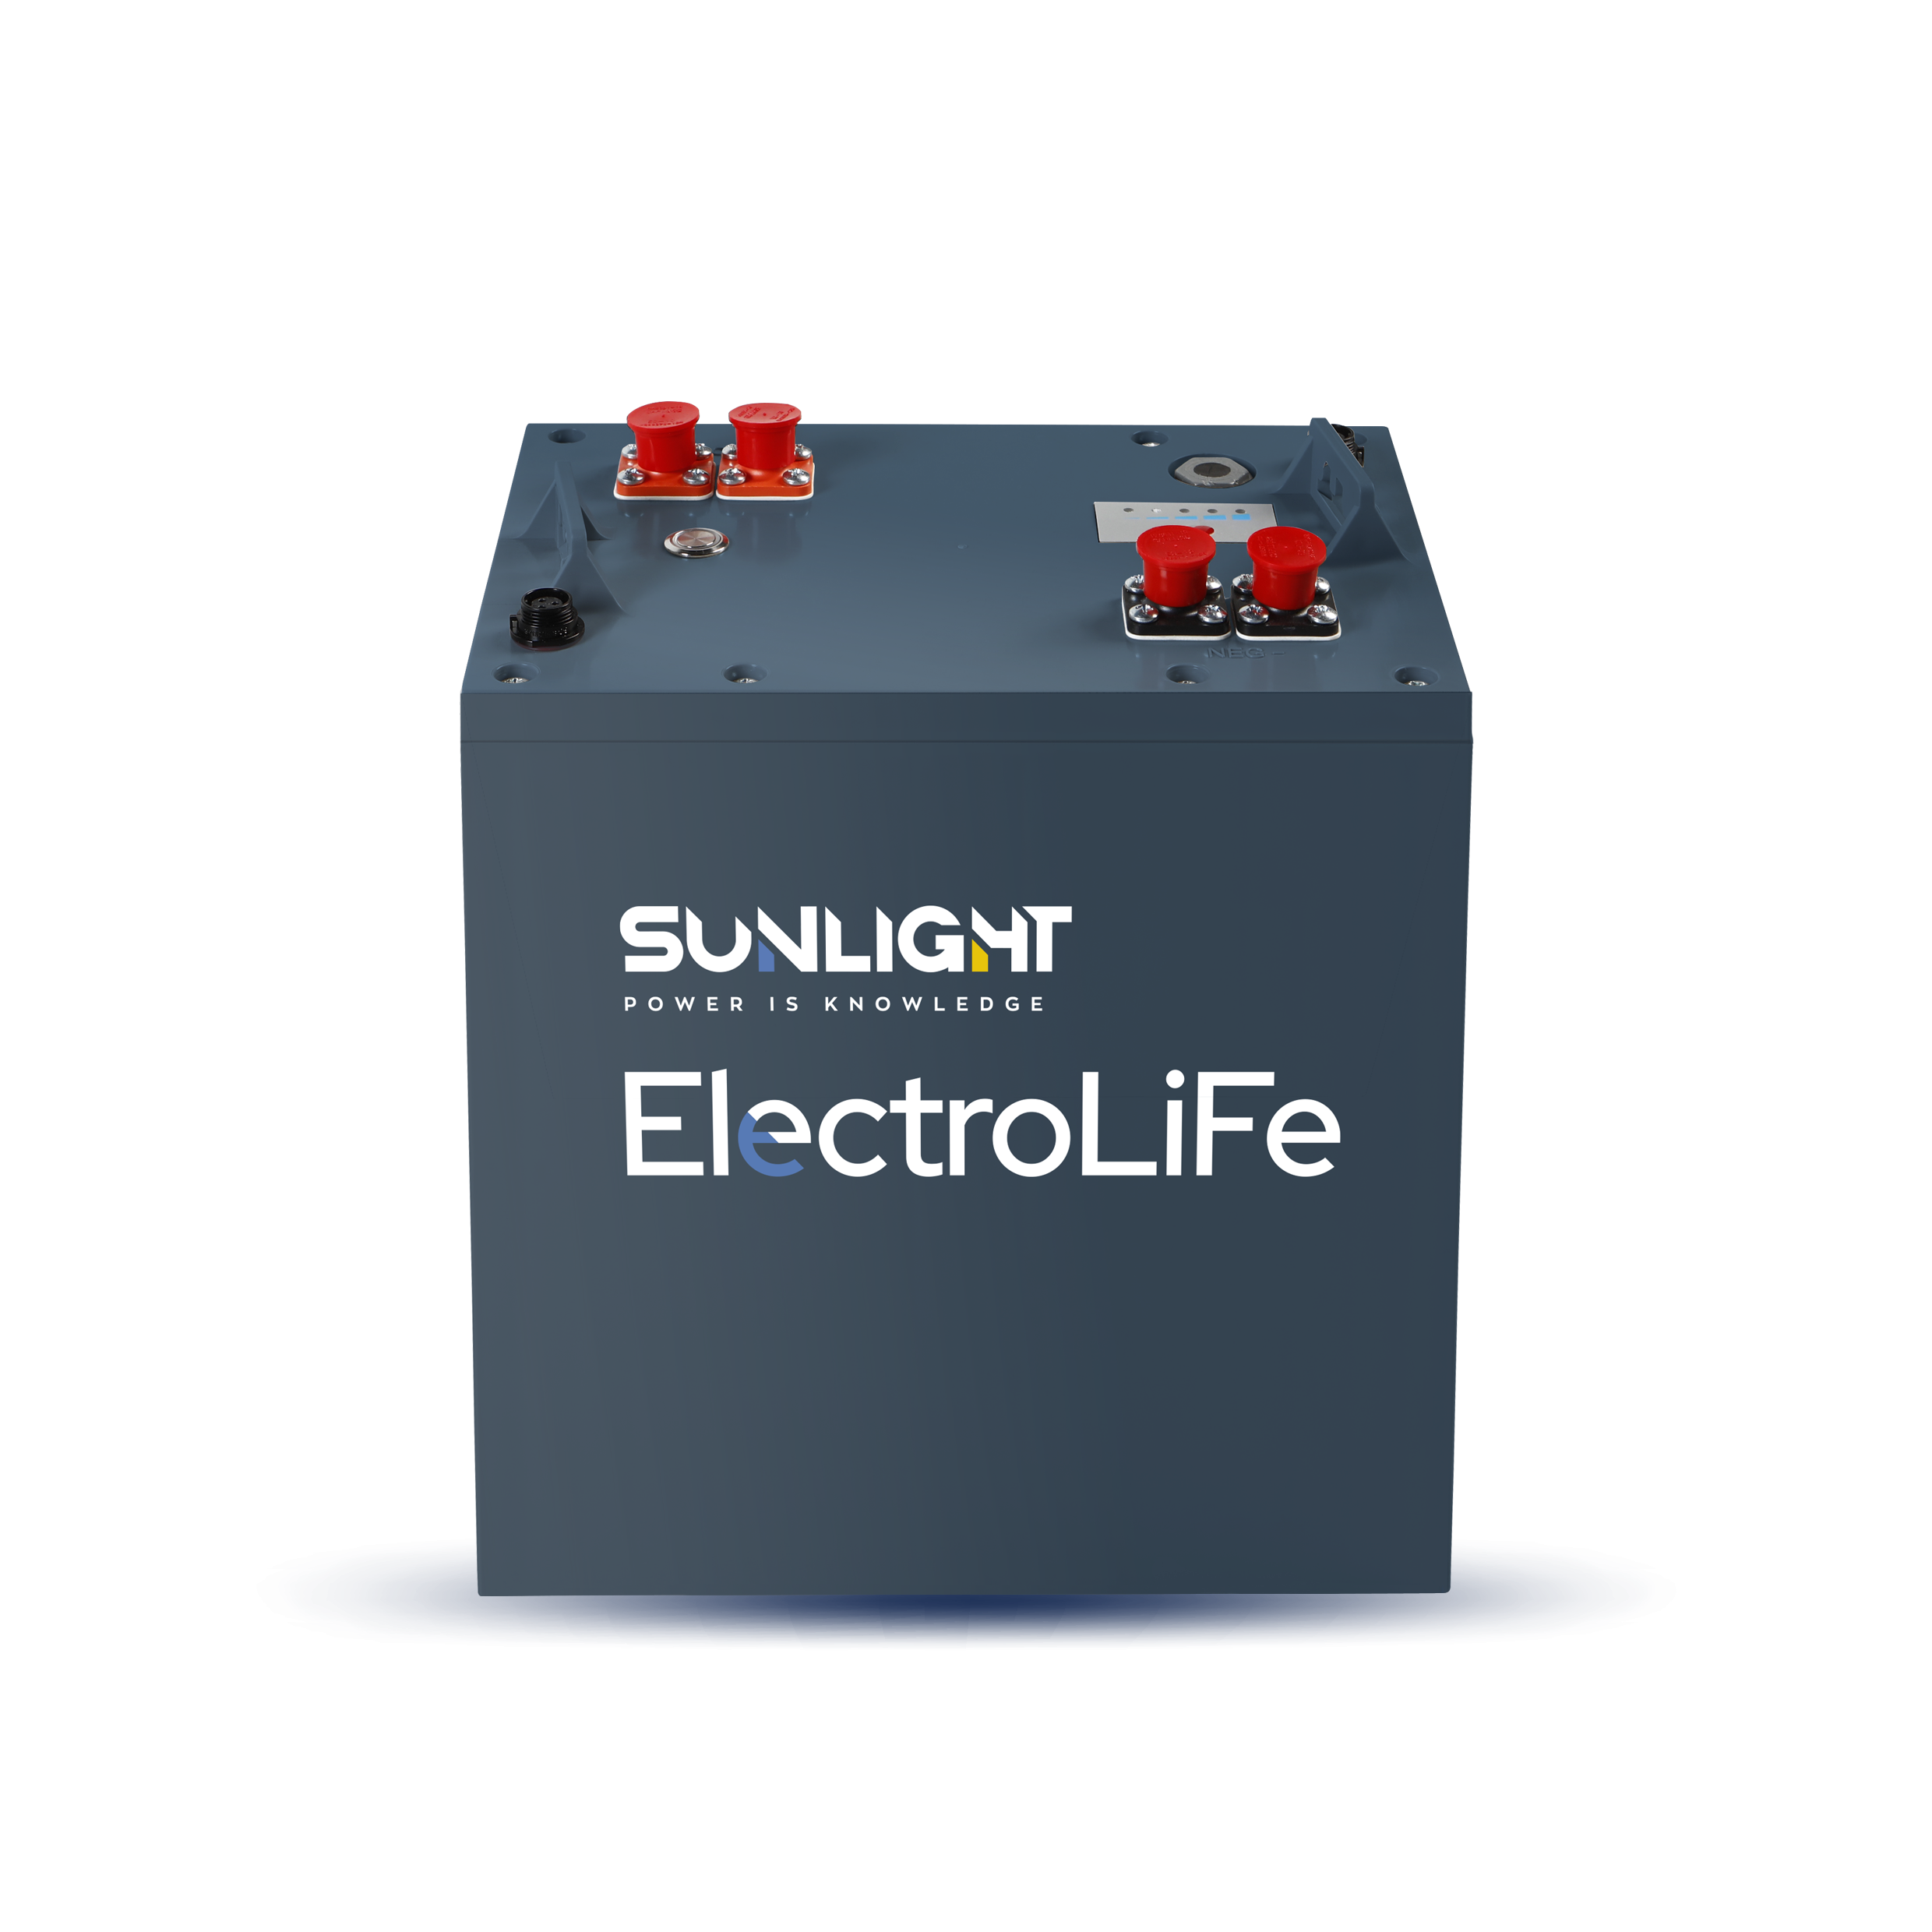 Sunlight ElectroLiFe - a high-quality plug & play lithium-ion battery with innovative capabilities.